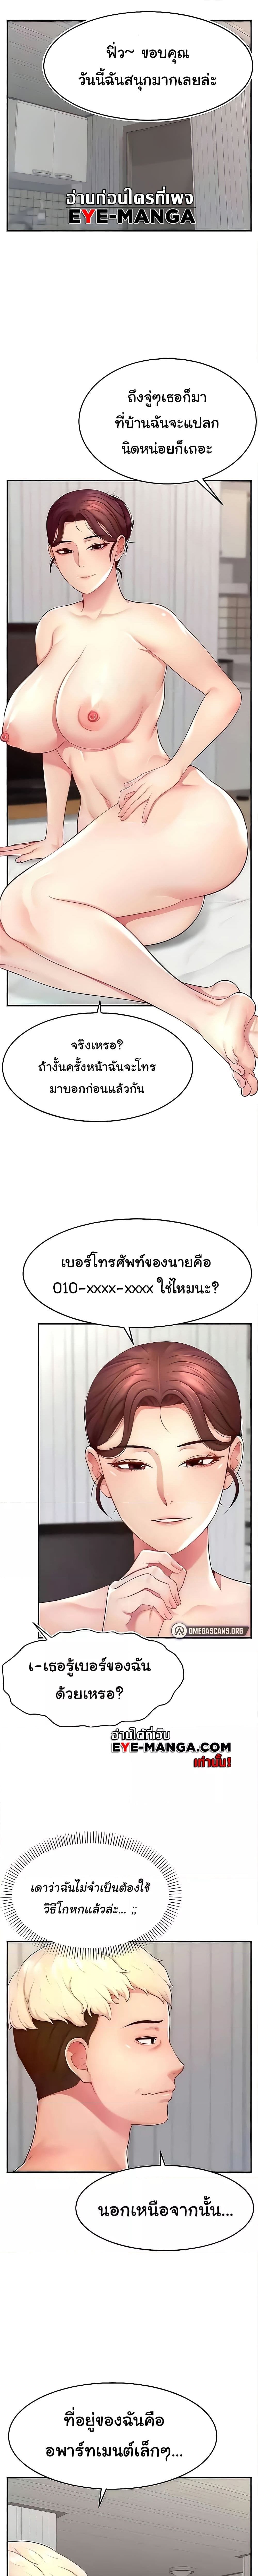 Making Friends With Streamers by Hacking! ตอนที่ 14 ภาพ 0